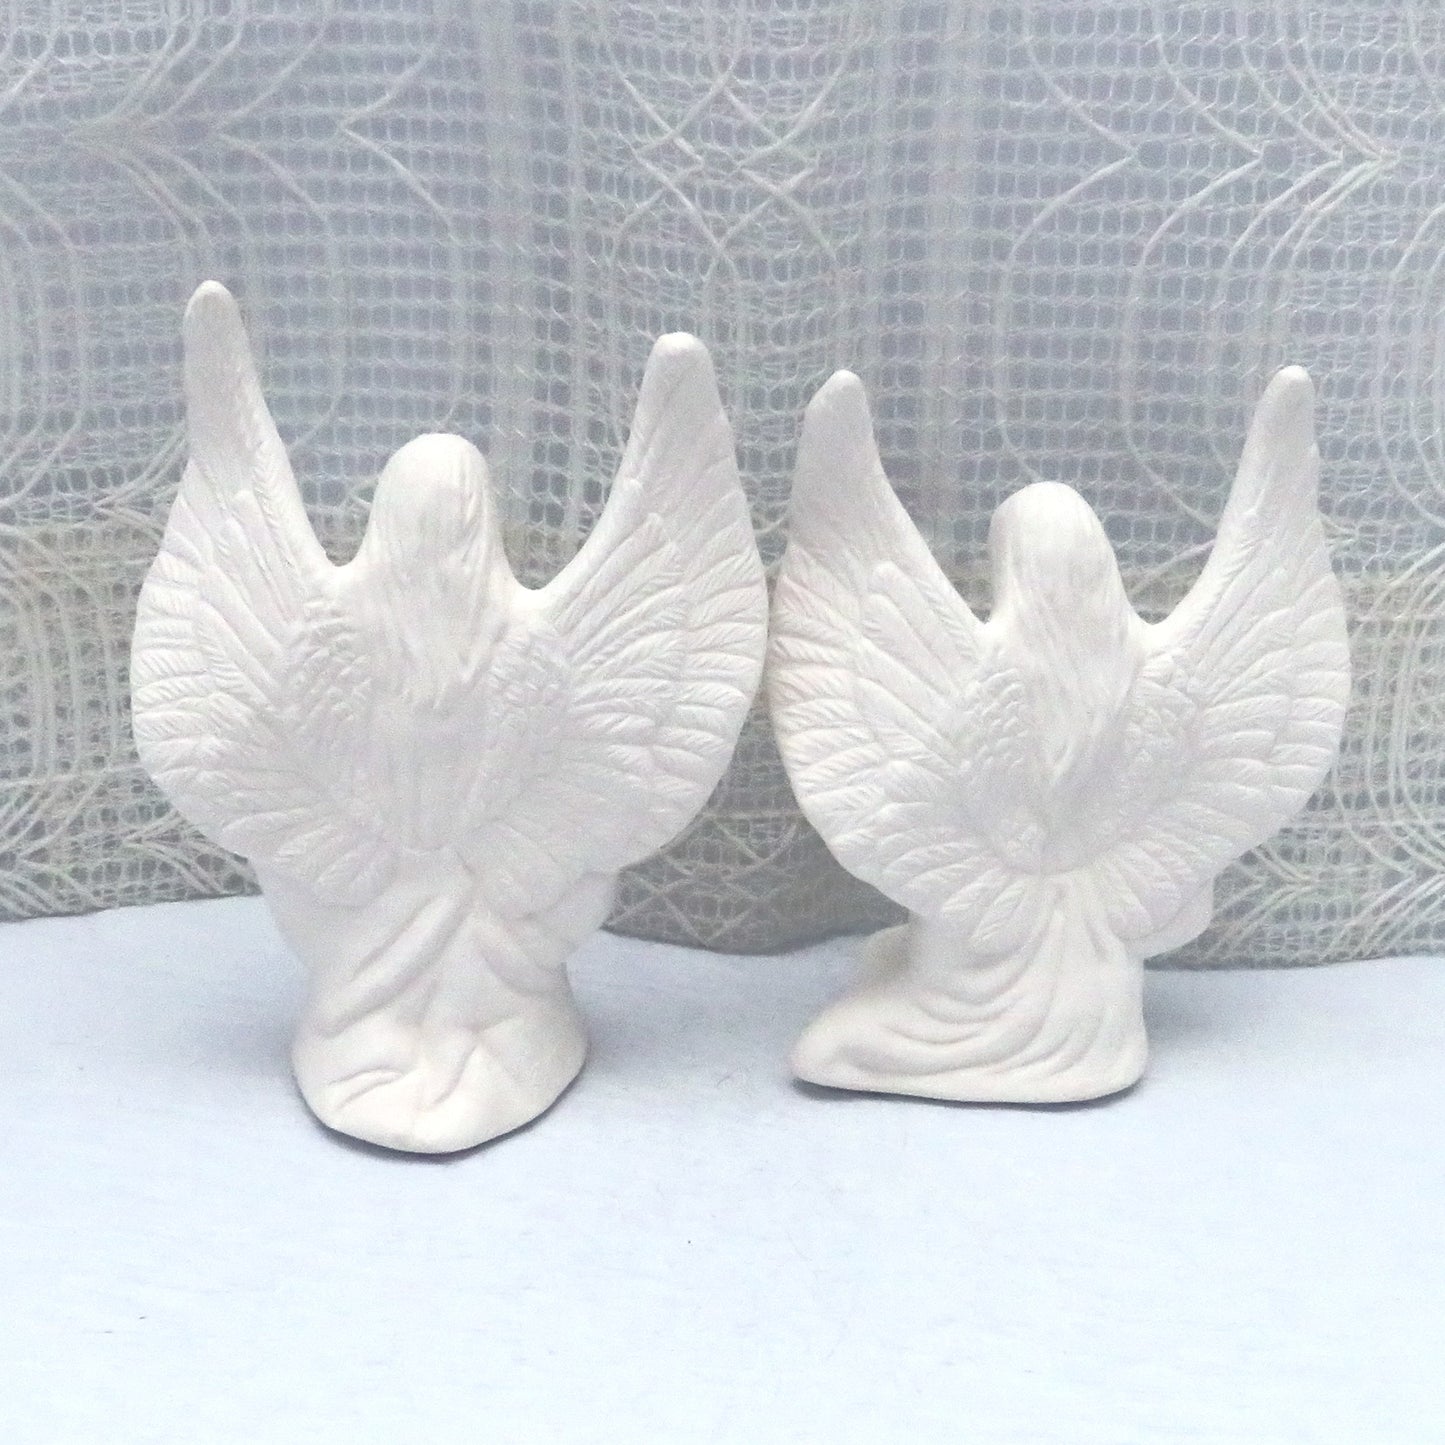 Back view of ready to paint angels showing the wings outstretched and the long hair.